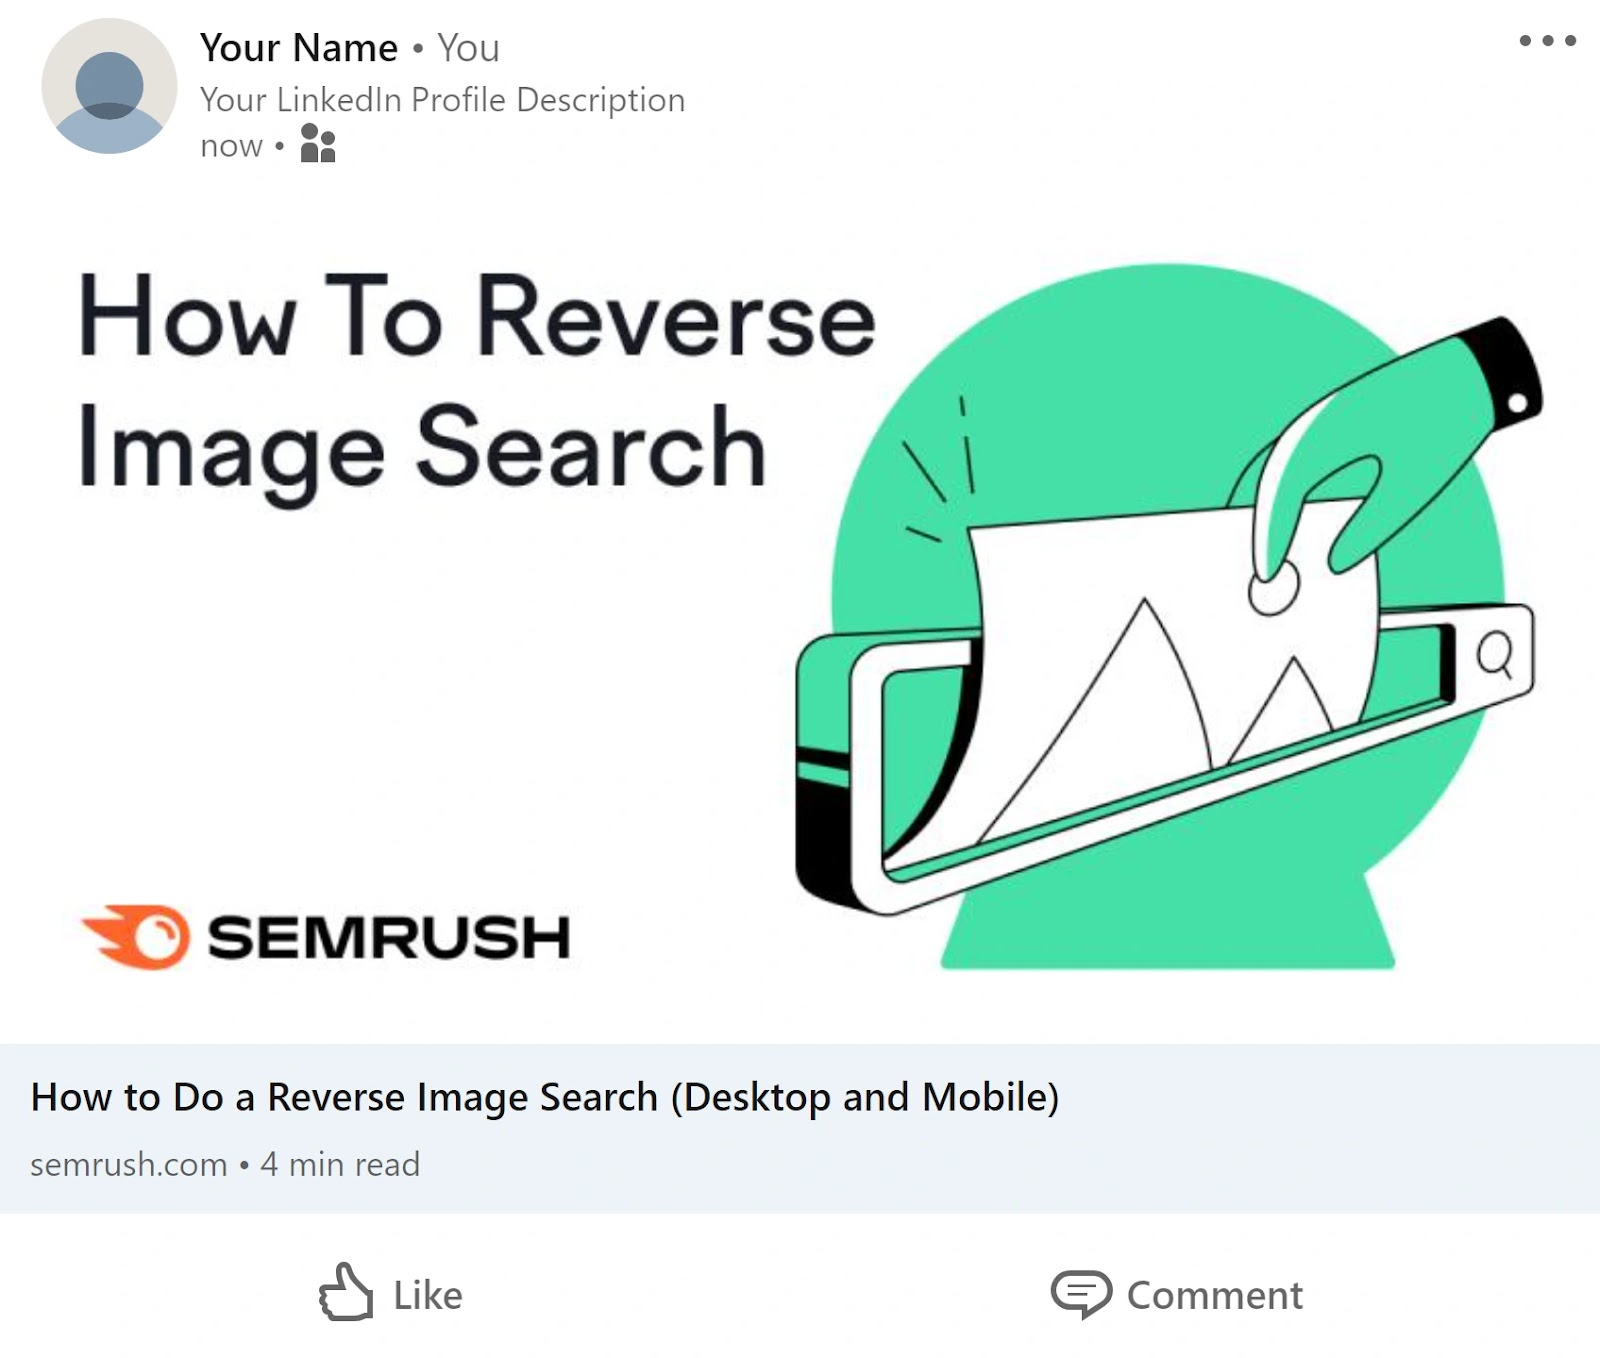 Semrush's article on "How To Reverse Image Search" appearing on LinkedIn